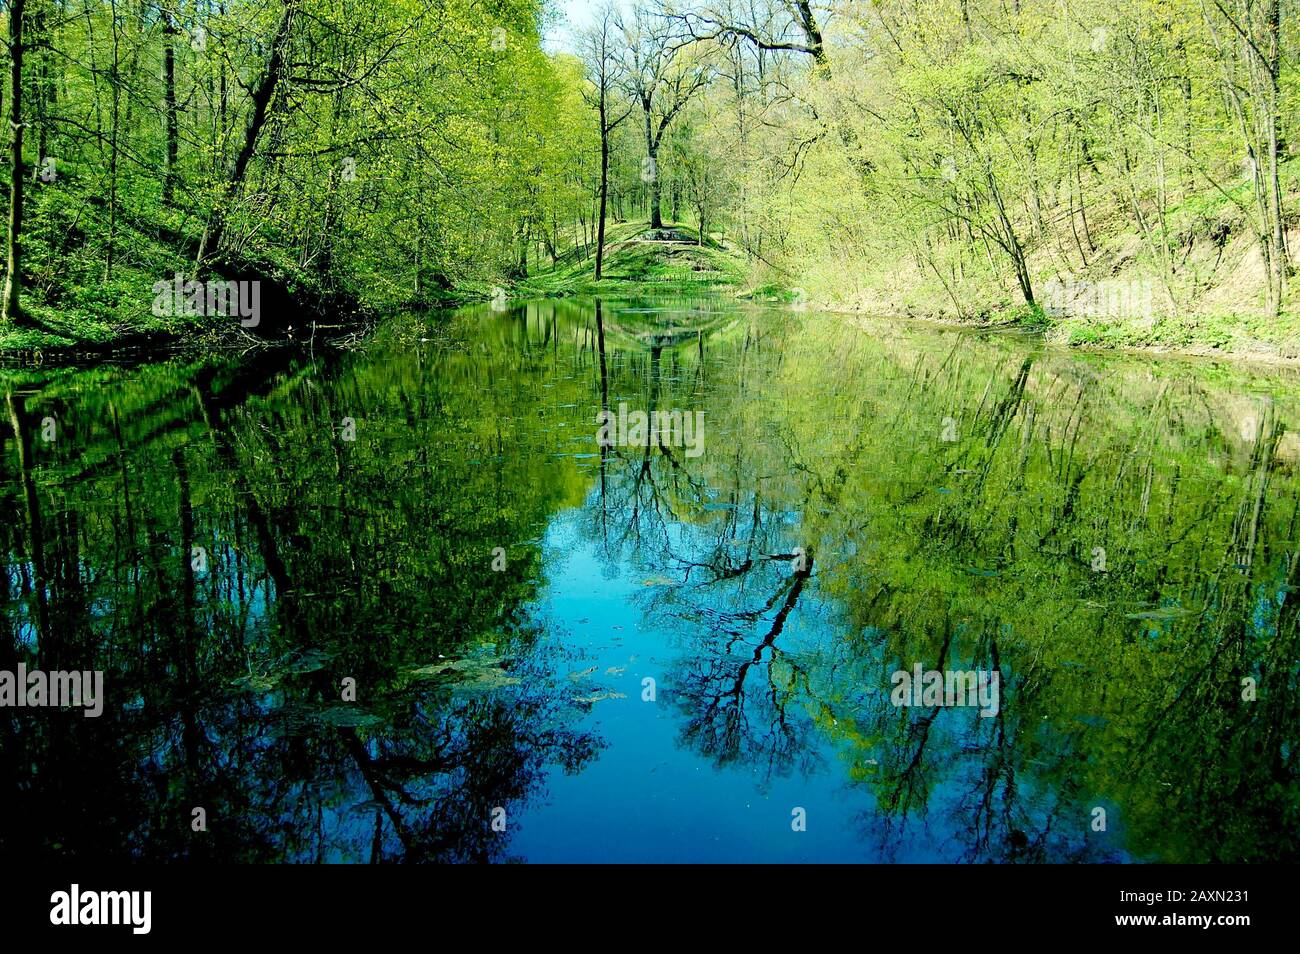 blue water lake in the spring park, on the banks of trees and reflected in the calm water, blue-green filter Stock Photo